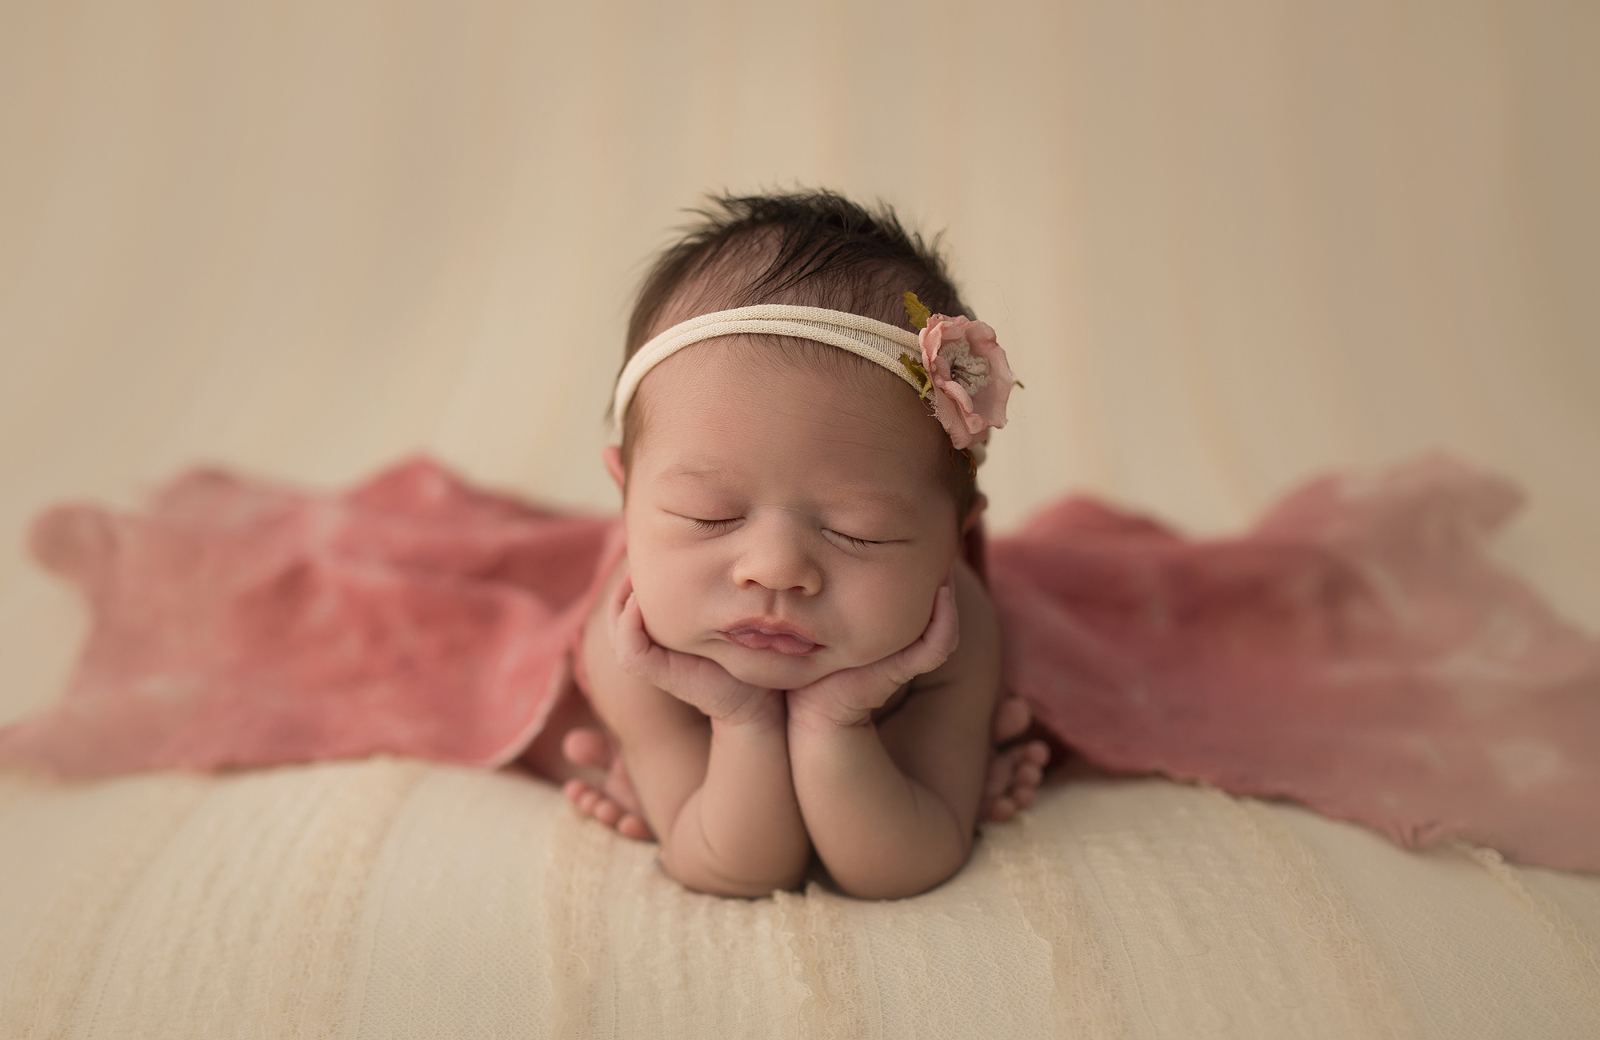 Studio newborn portrait session with cream coloured background from the front, the baby sleeping on a cream-coloured blanket in a froggy pose, along with a flower headband and a light pink blanket behind. Image by Helga Himer Photography, Sudbury, Ontario.